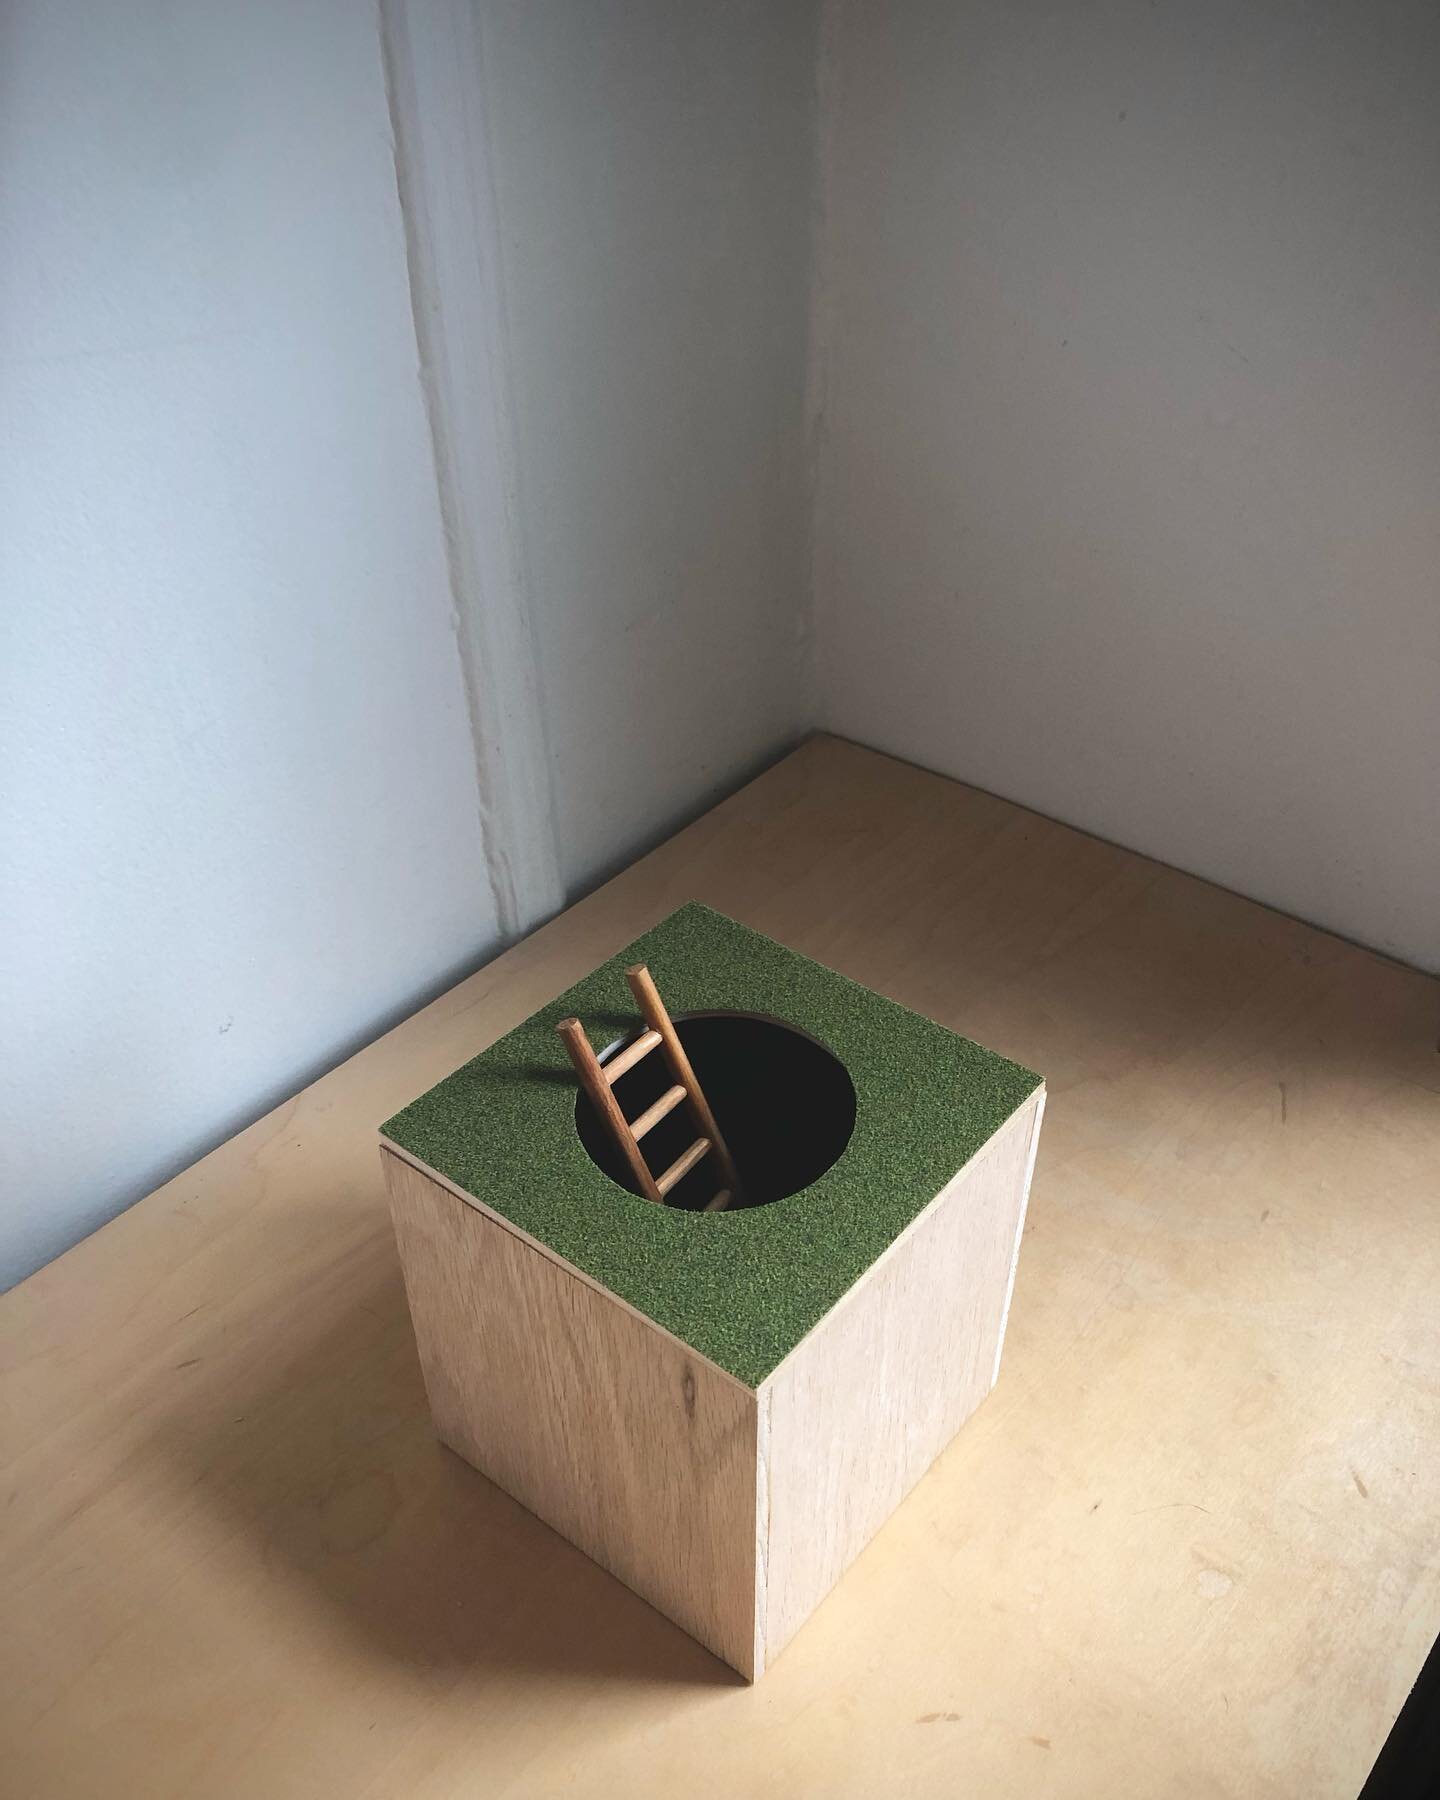 great depths
plywood, paper, model grass, wood dowel
6.25 x 5 x 5 inches